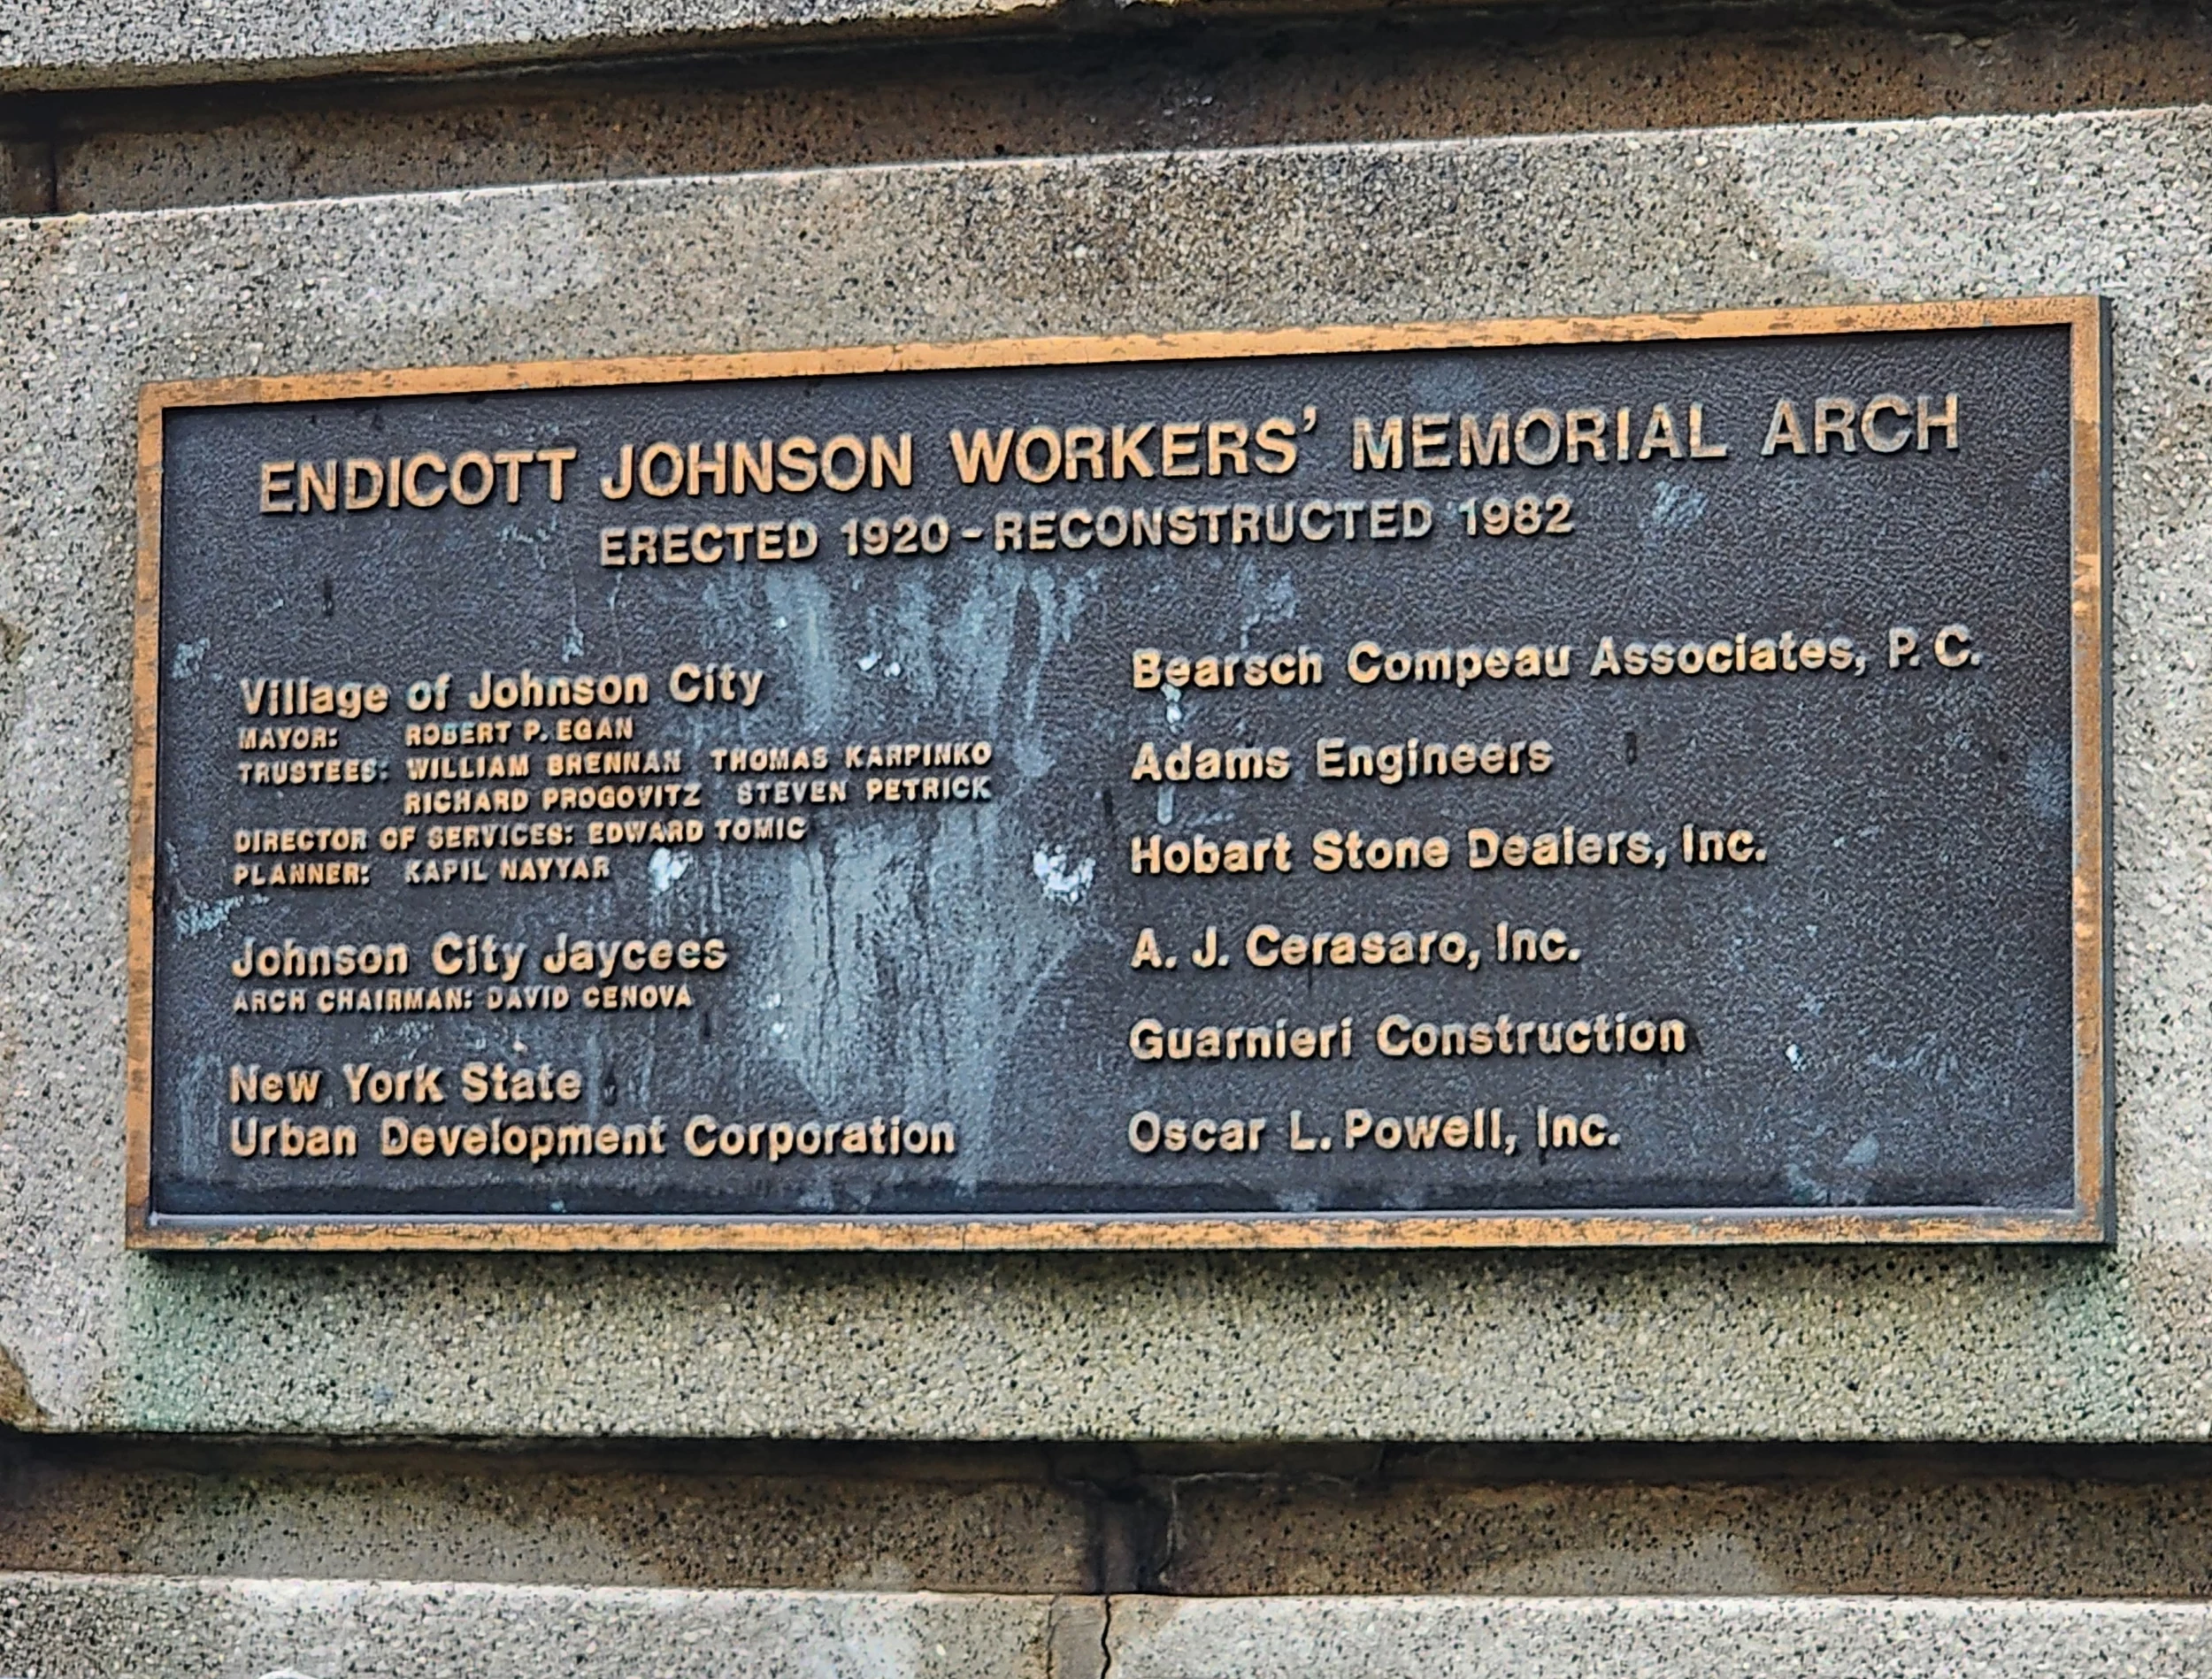 A plaque commemorating the 1982 Workers Arch reconstruction project. Photo: Bob Joseph/WNBF News